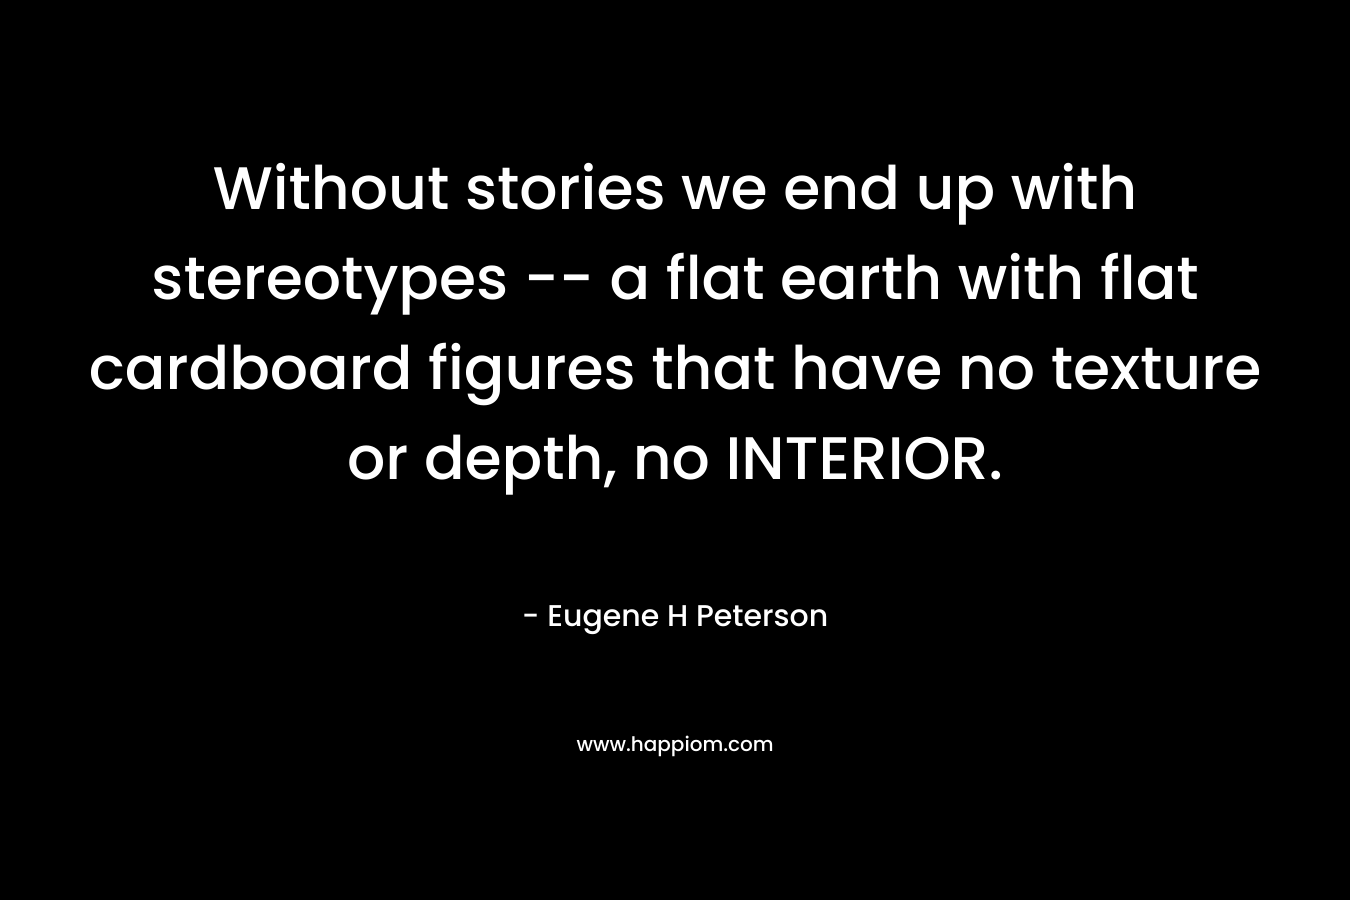 Without stories we end up with stereotypes — a flat earth with flat cardboard figures that have no texture or depth, no INTERIOR. – Eugene H Peterson